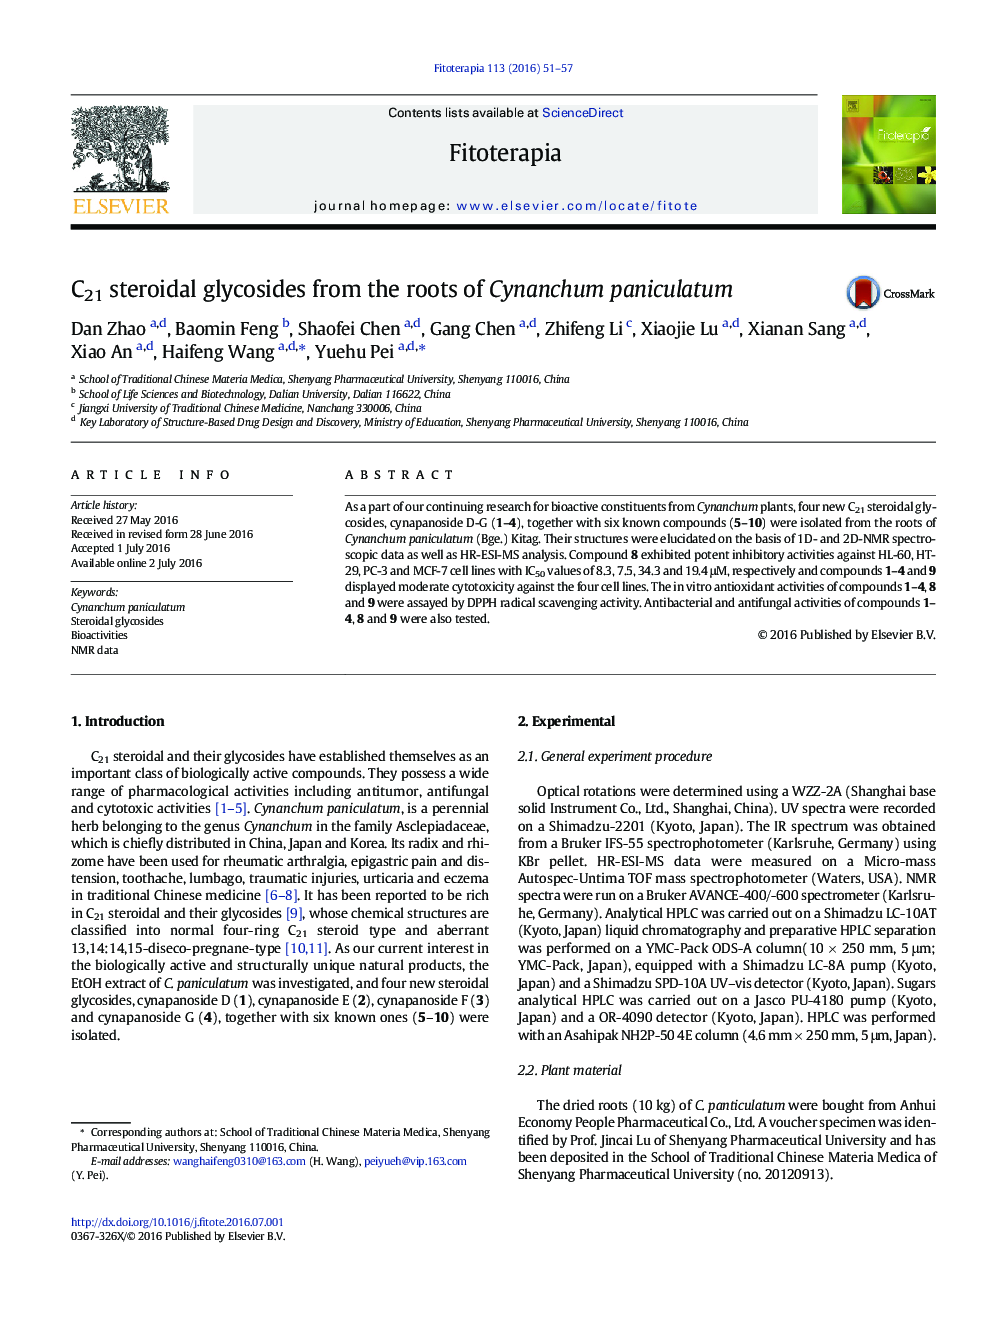 C21 steroidal glycosides from the roots of Cynanchum paniculatum